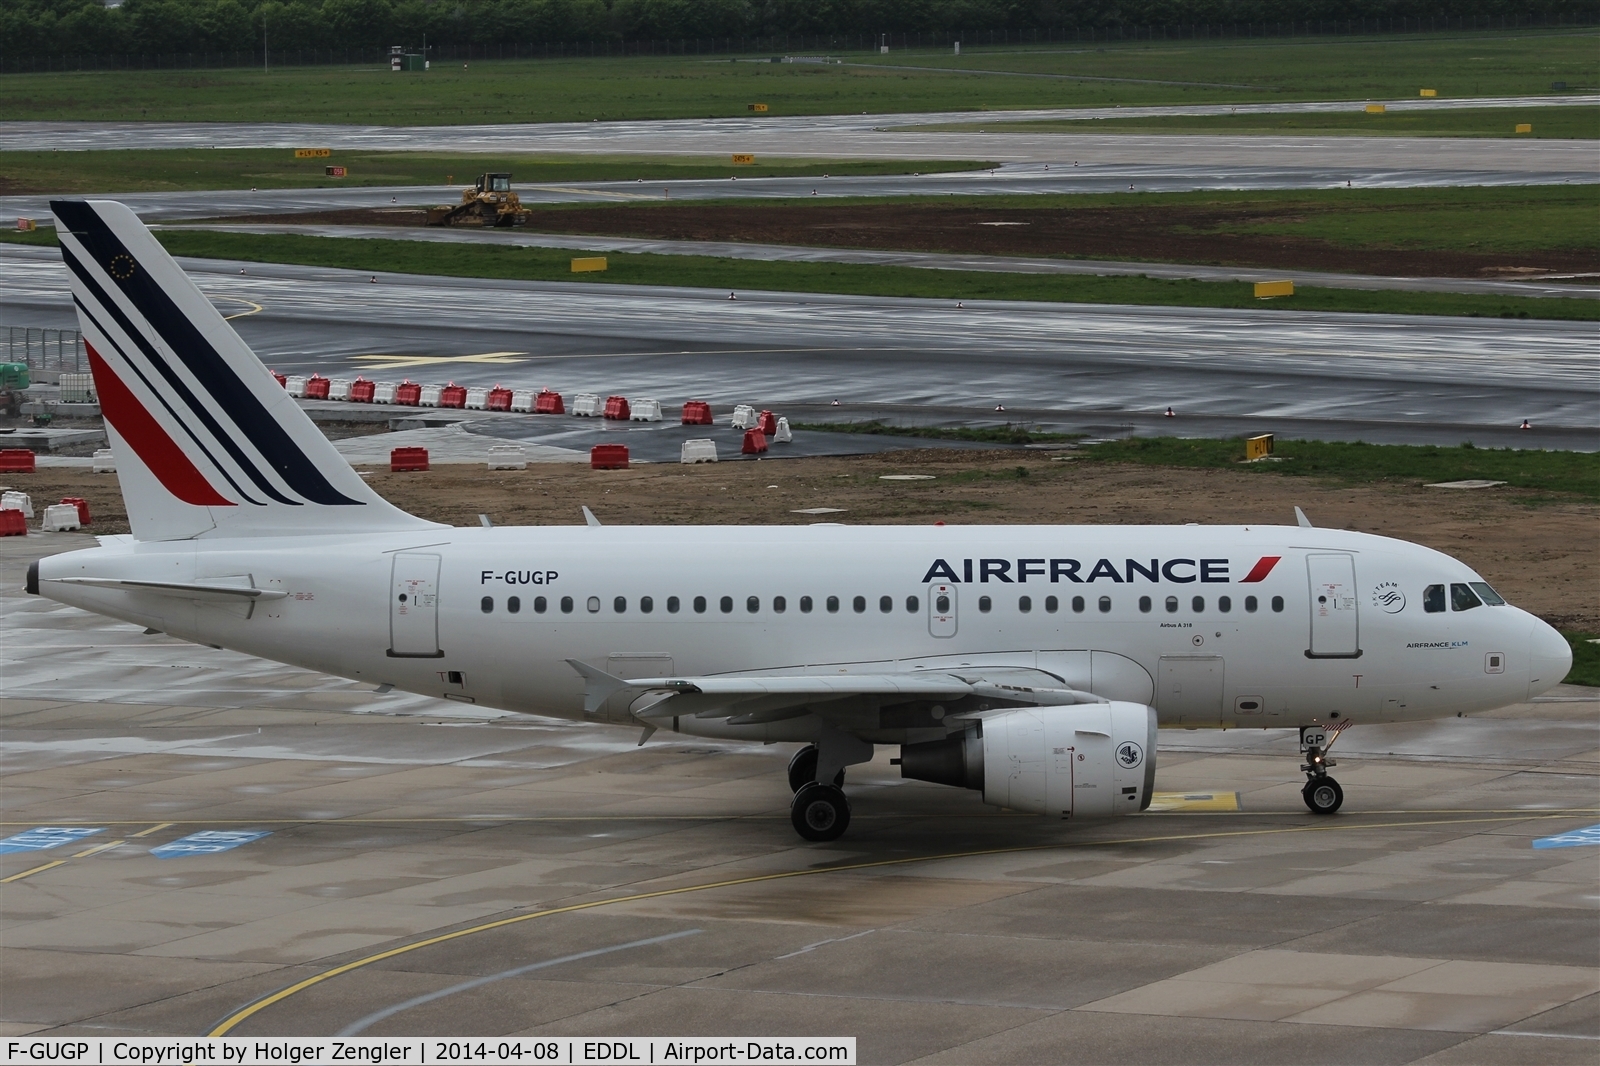 F-GUGP, 2006 Airbus A318-111 C/N 2967, Shuttle to CDG on taxi to departure...